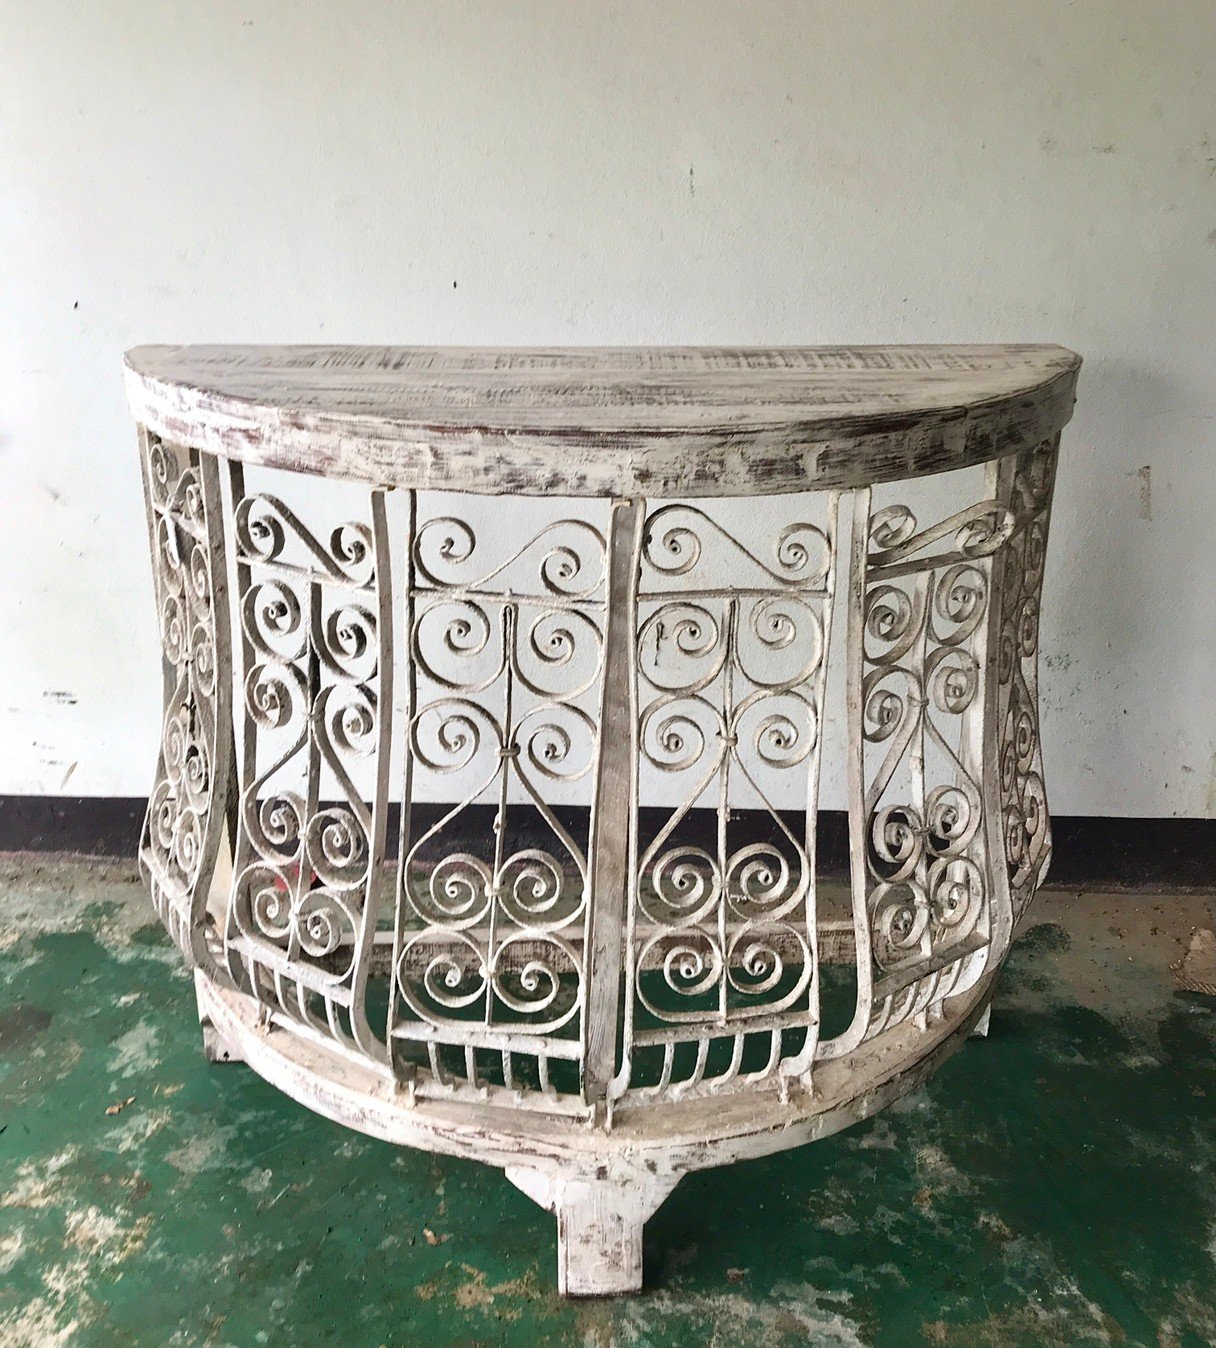 CL33 White Console Table with Iron Decor